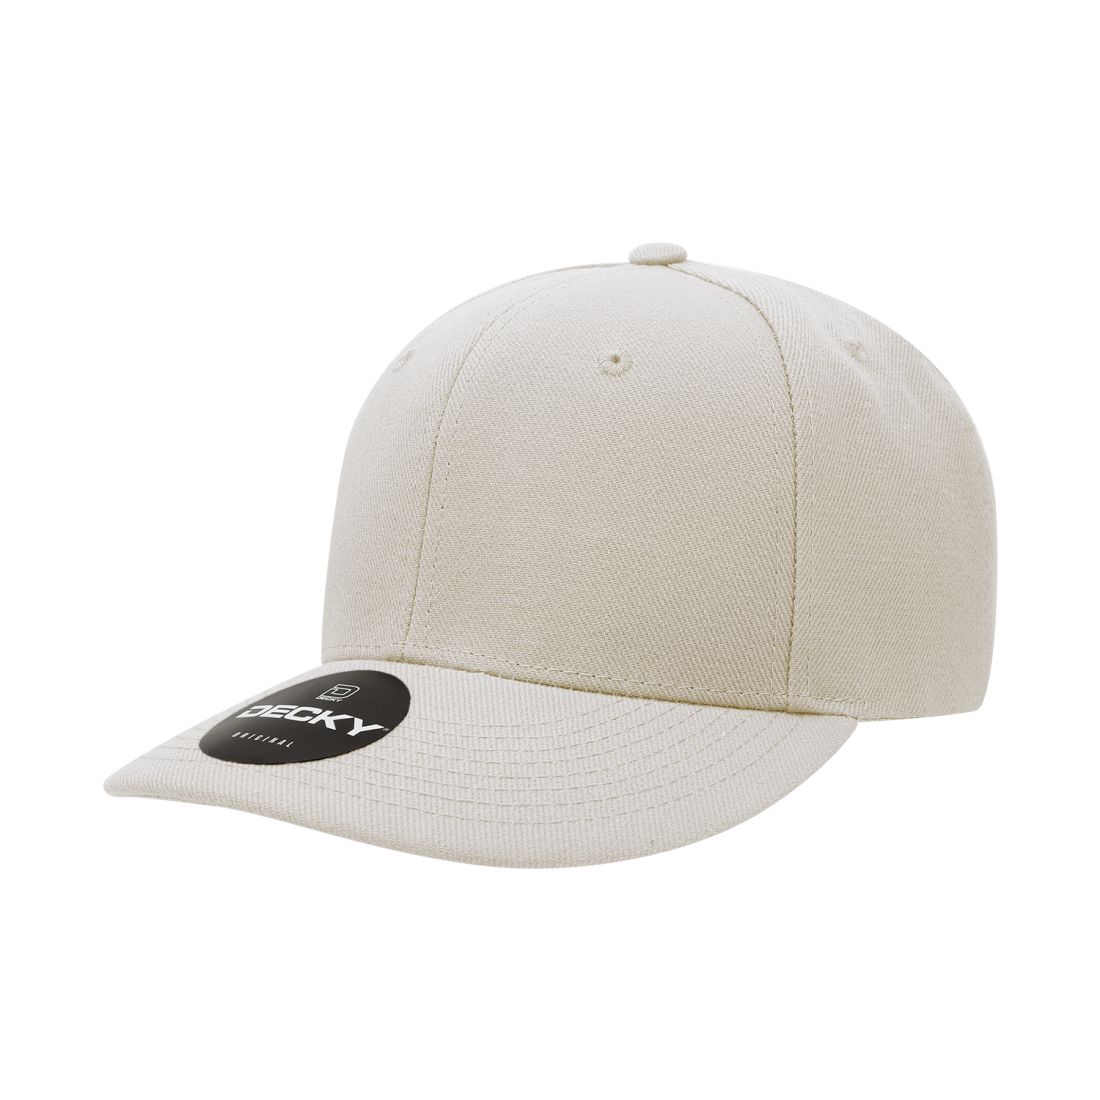 Decky Deluxe 207 Mid Profile Hats 6 Panel Curve Bill Polo Dad Baseball Caps Wholesale 